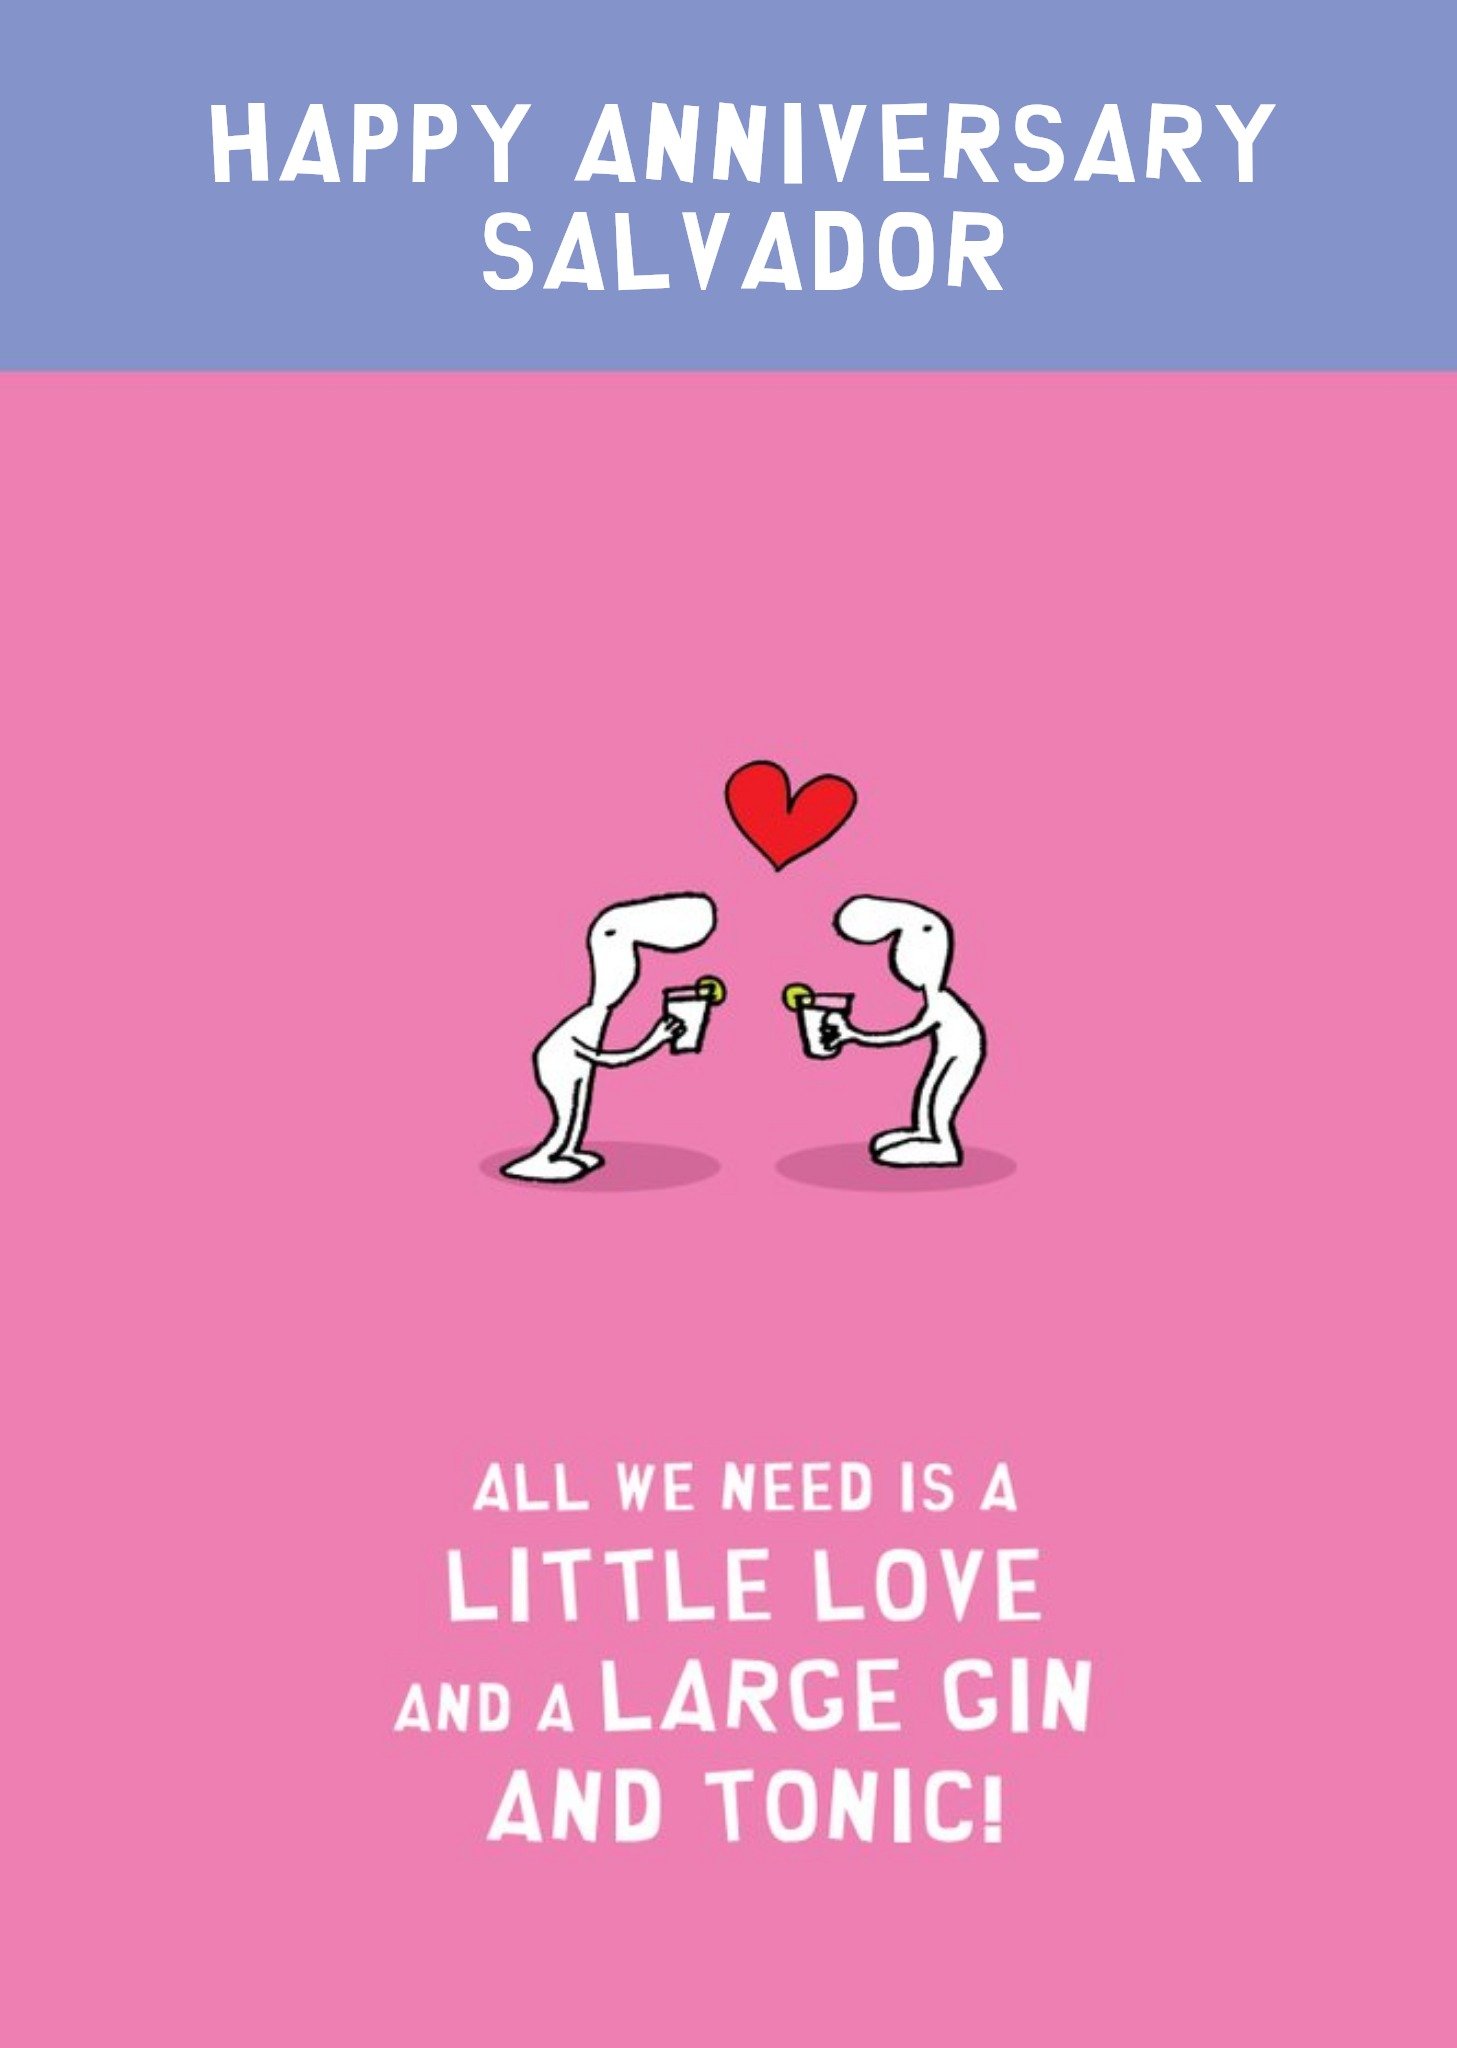 Other Humorous Harold's Planet Characters Drinking Gin Anniversary Card Ecard